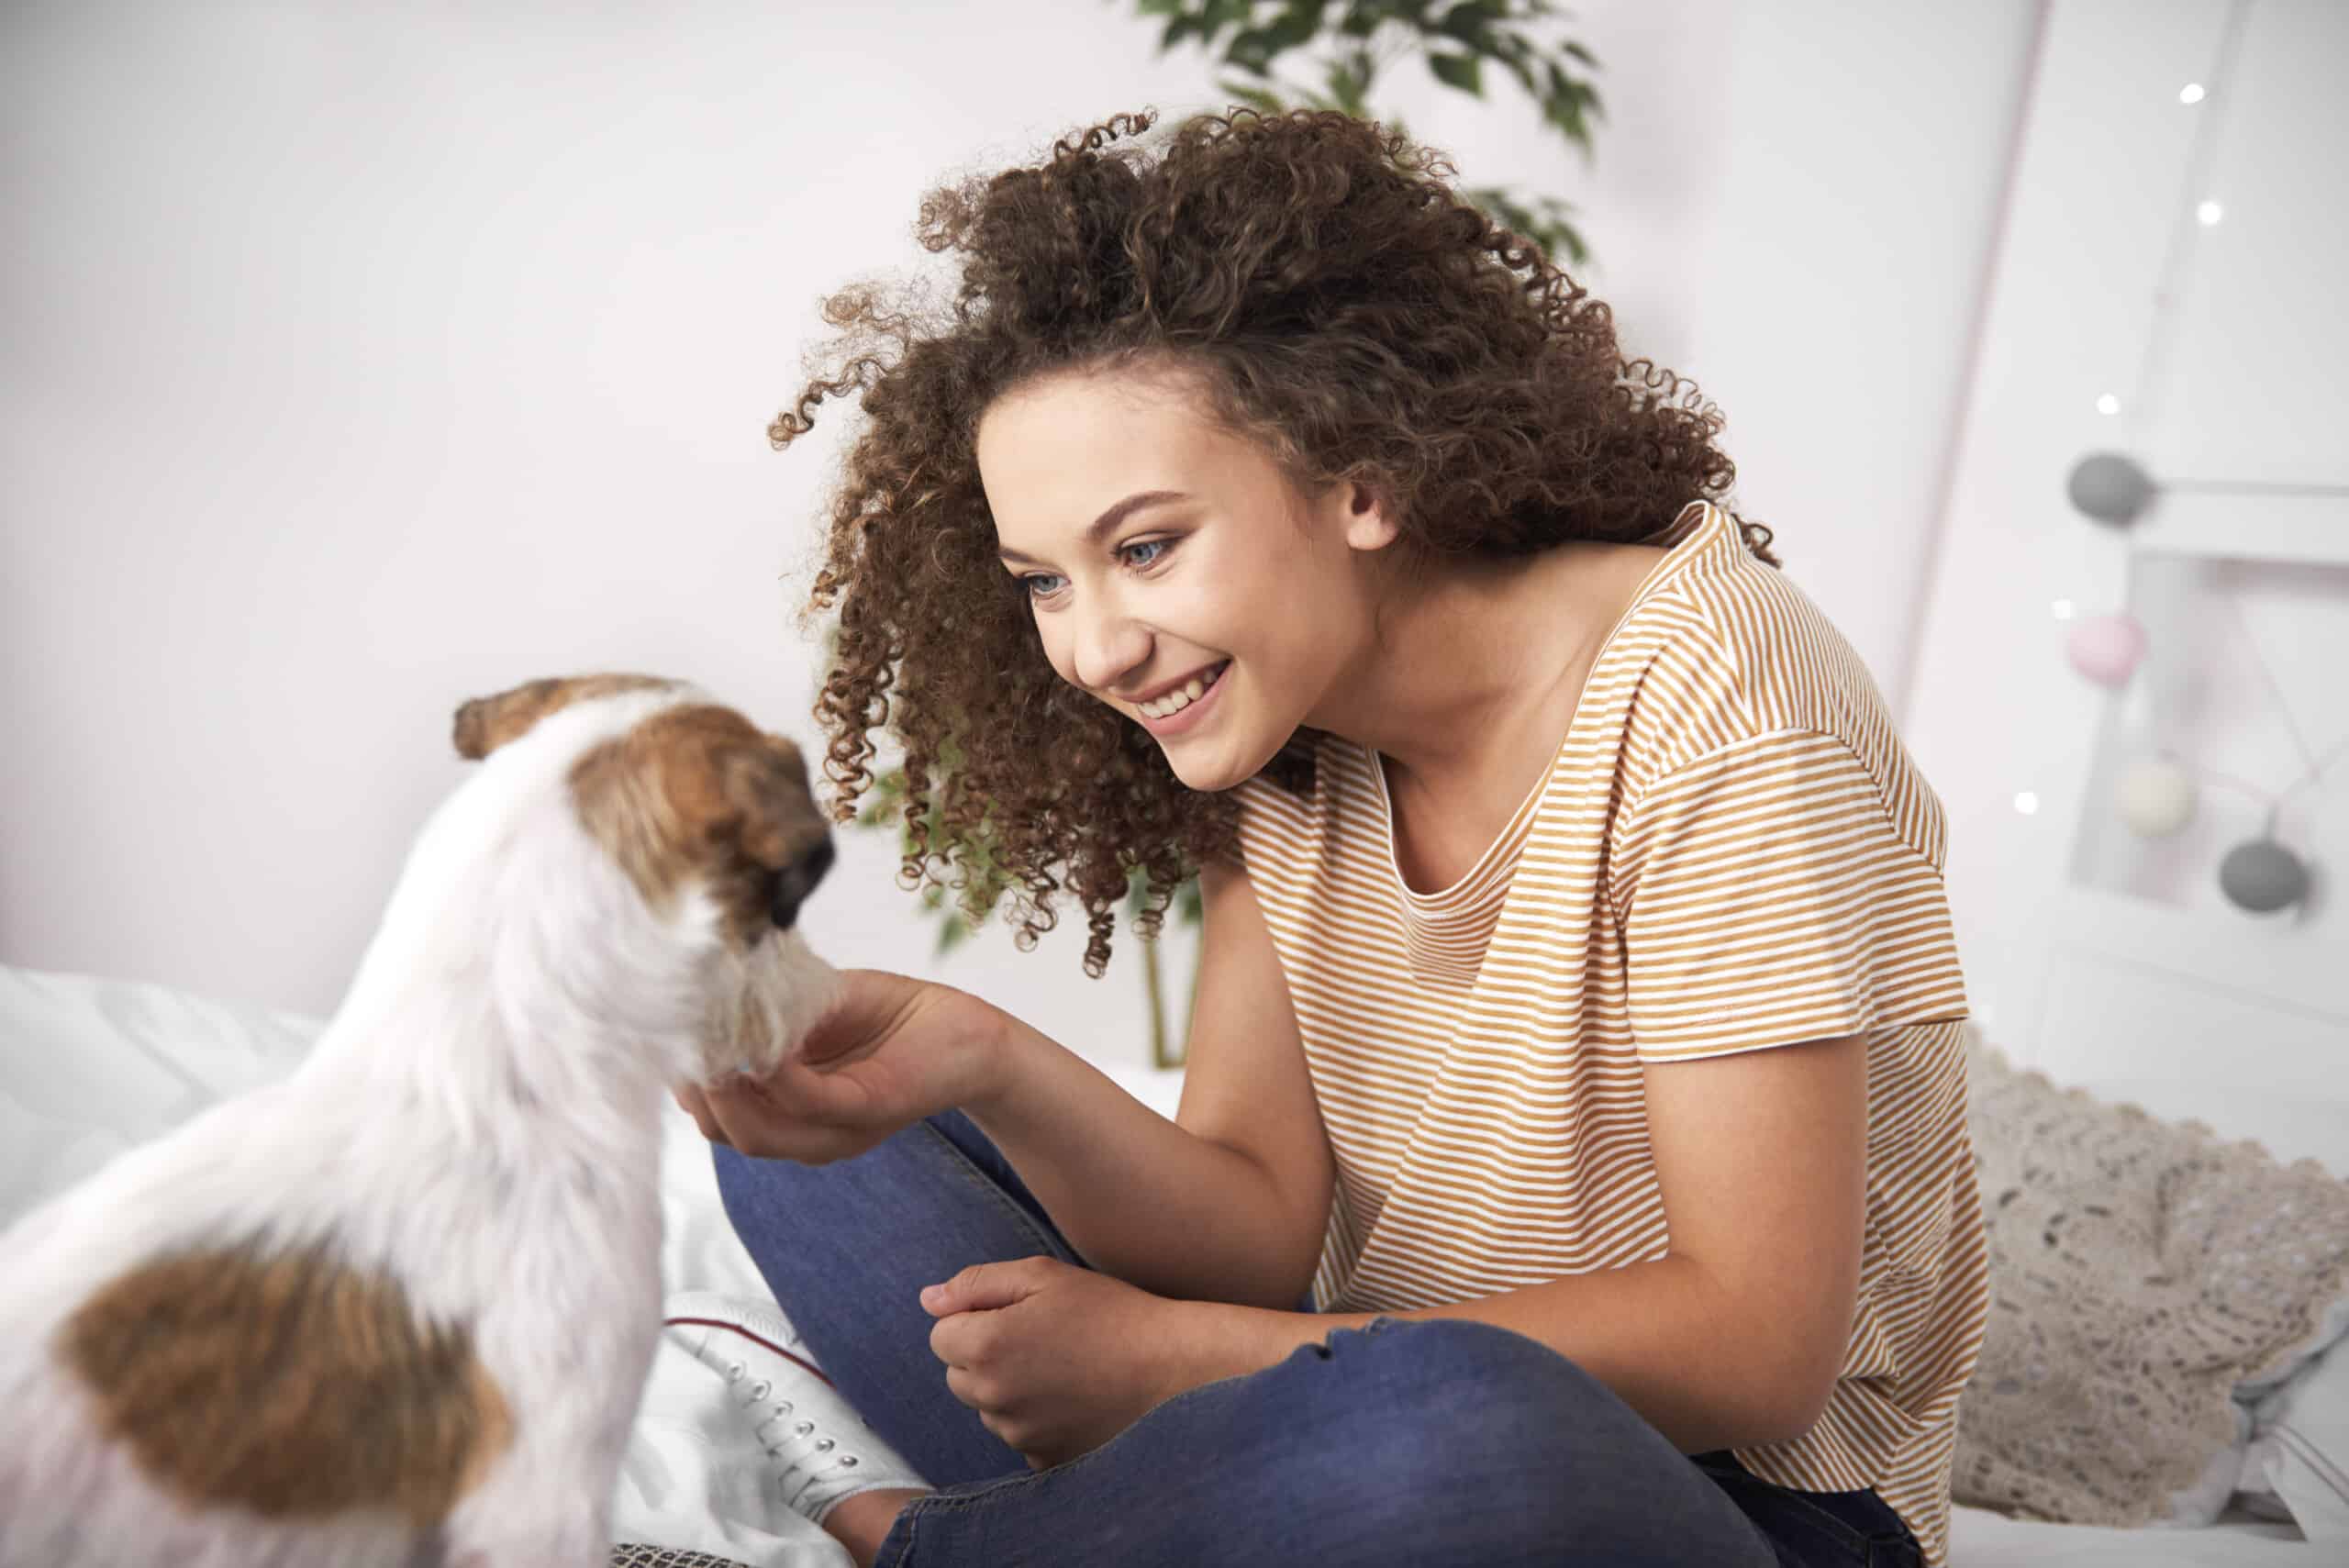 Learn everything you need to know about pet insurance